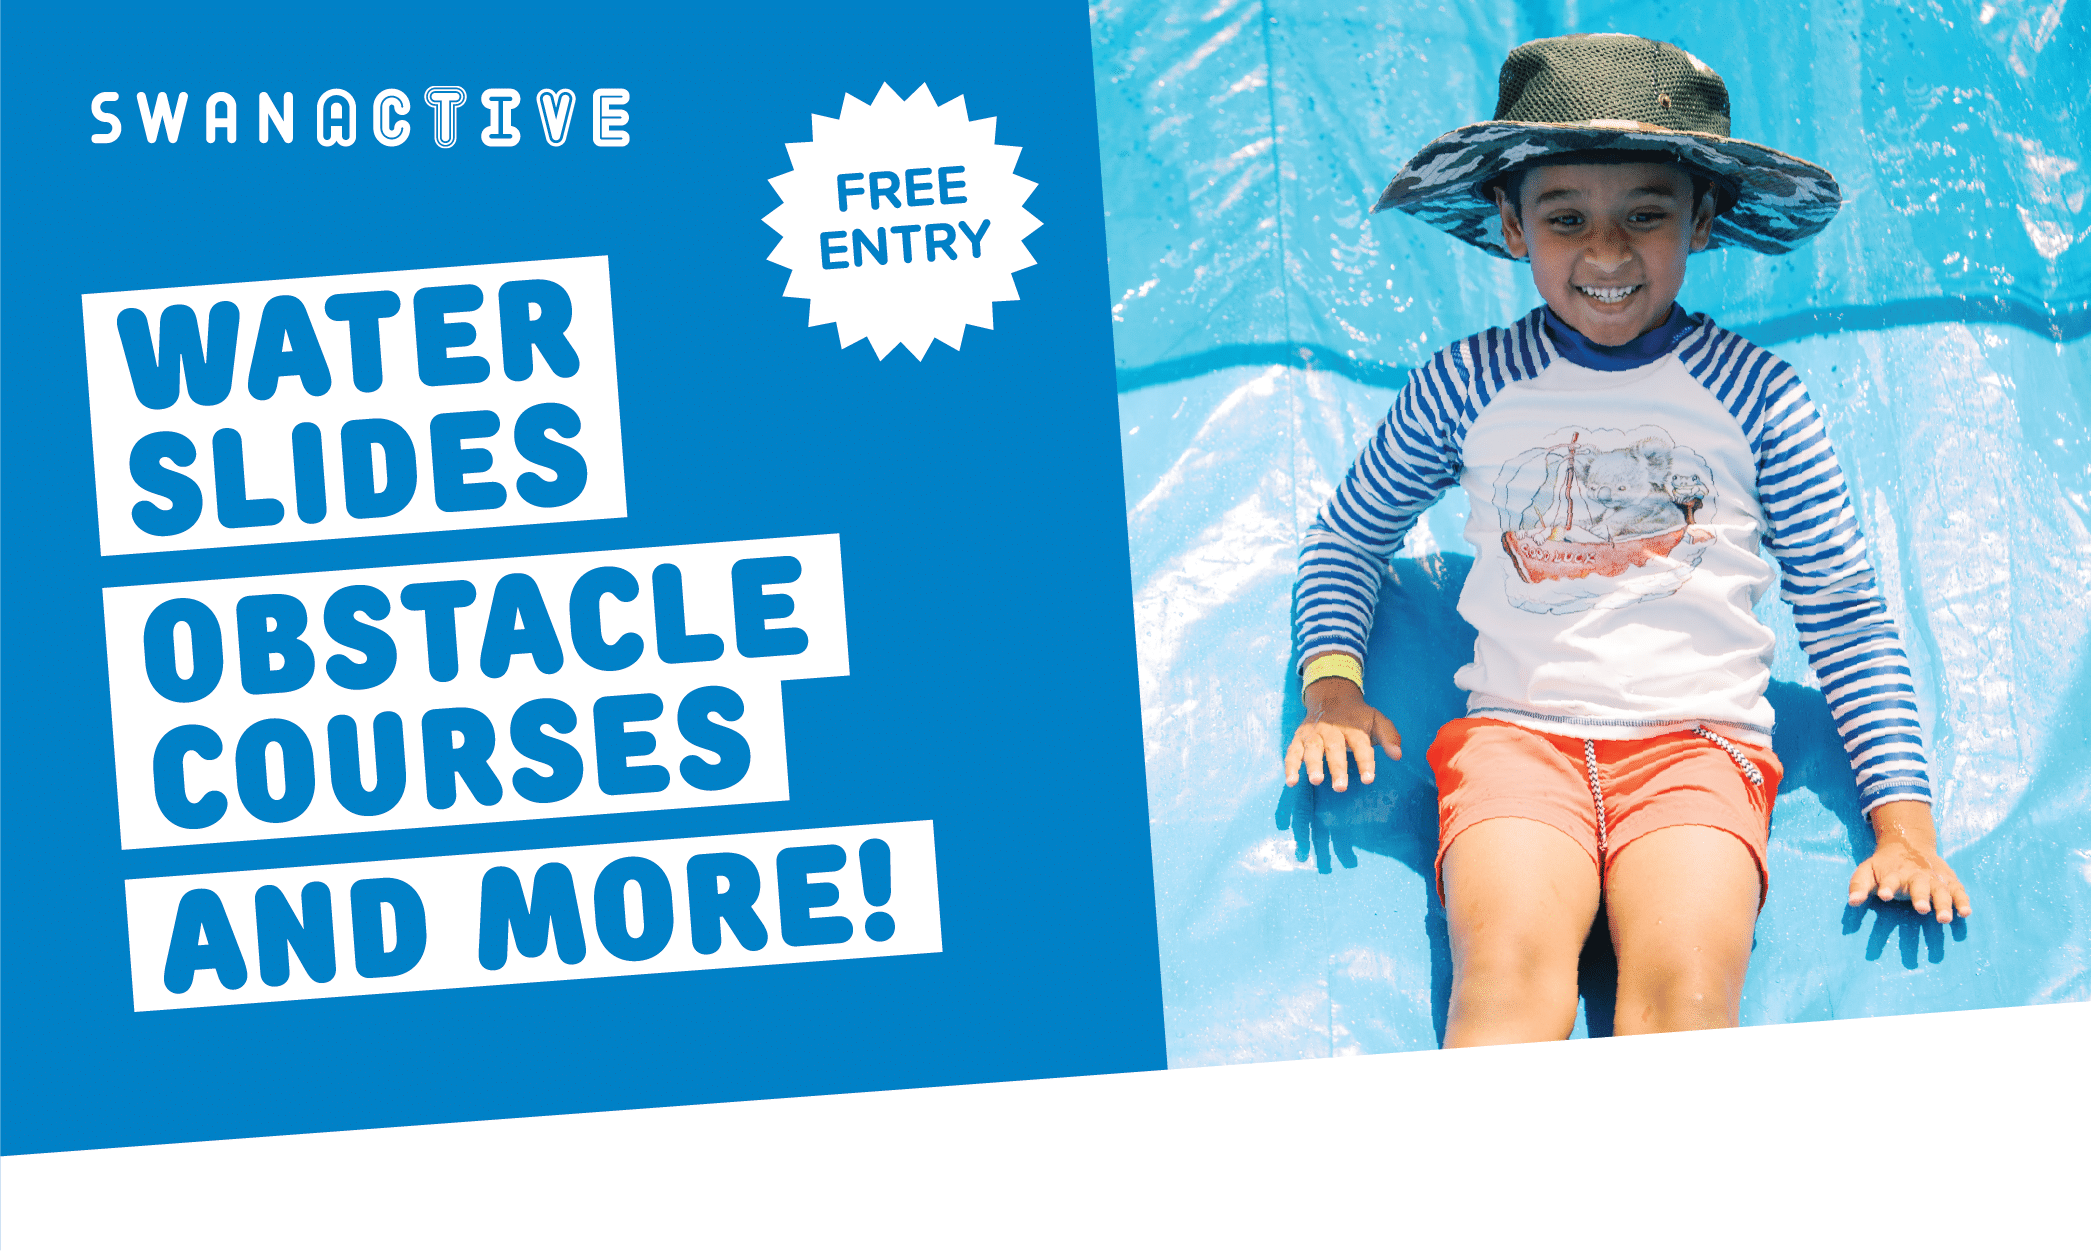 Swan Inflatables - water slides, obstacle courses and more with a child sliding down a water slide.